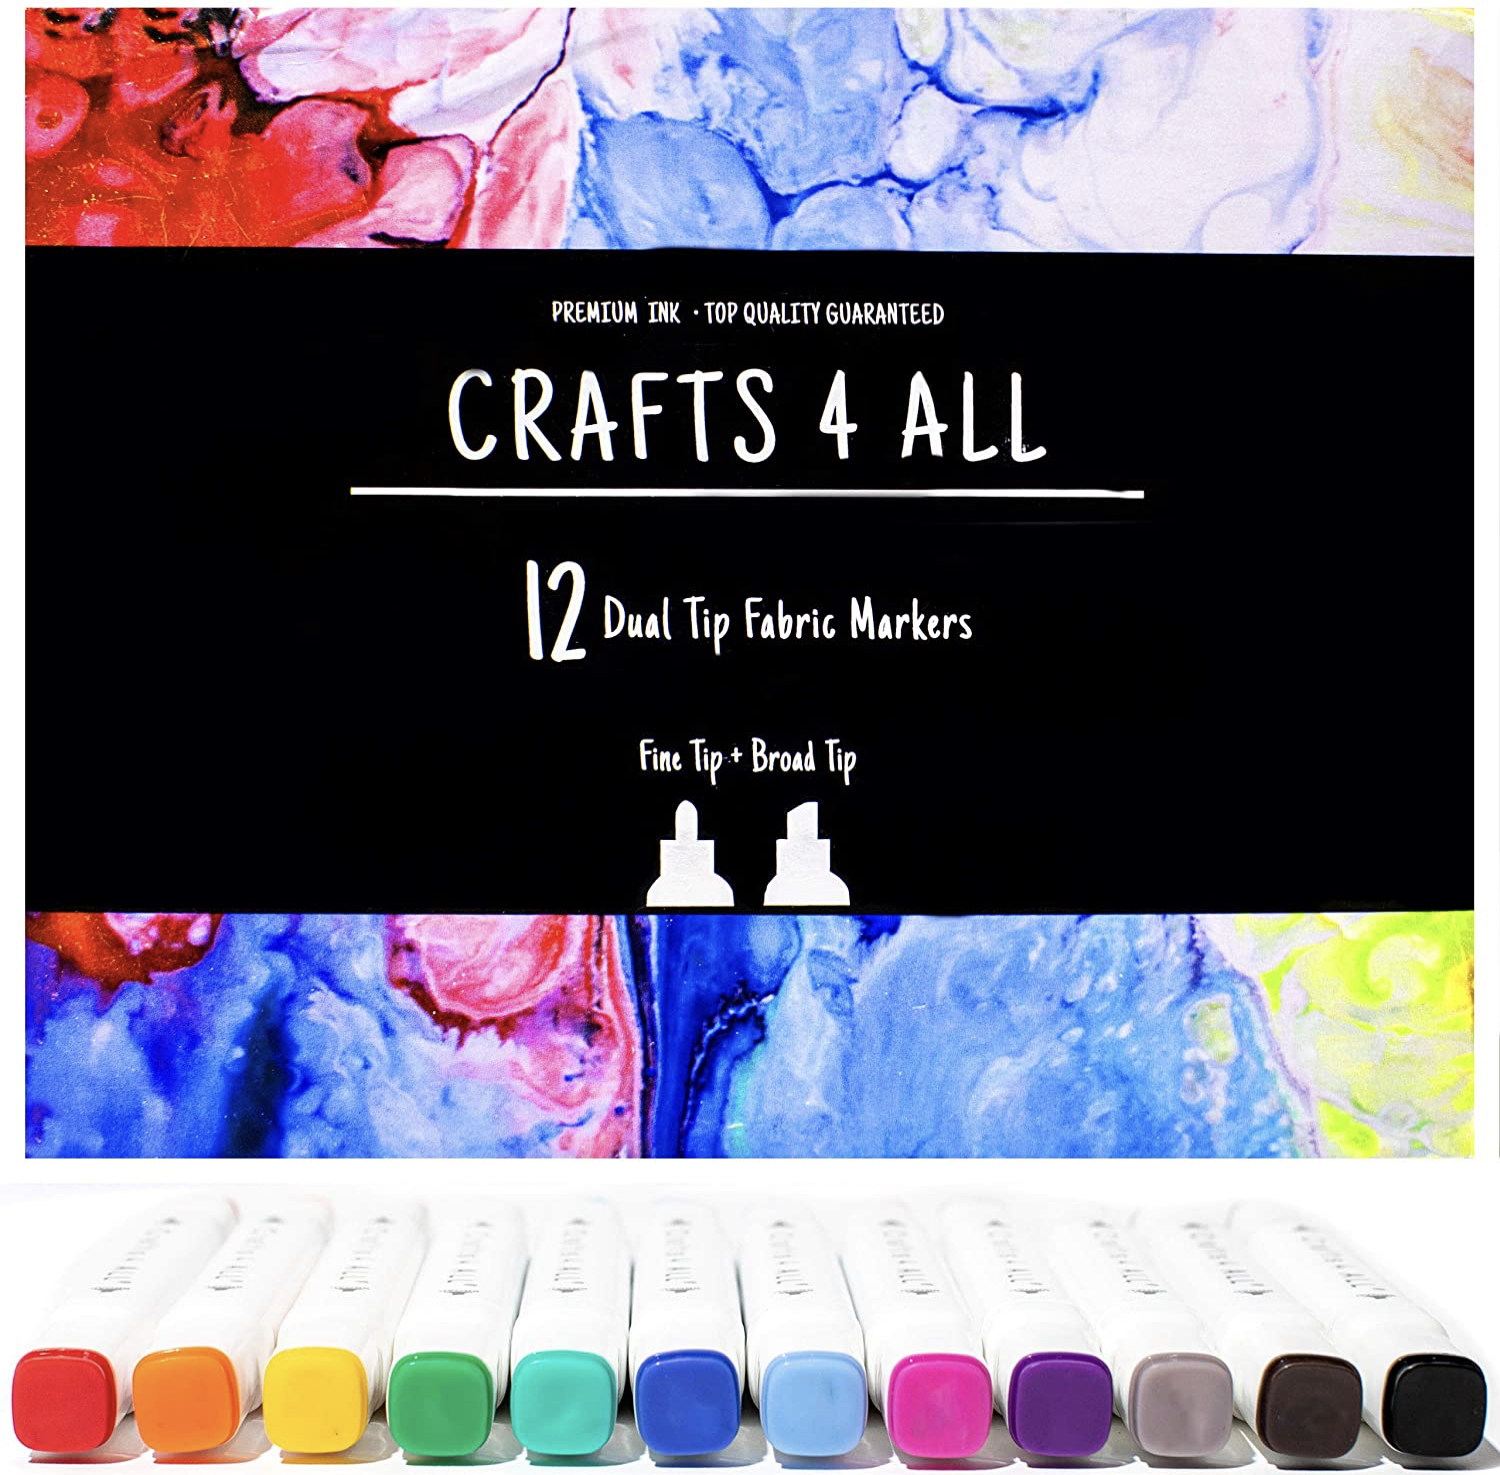 Crafts 4 All Fabric Markers Pens TIP Fabric Paint